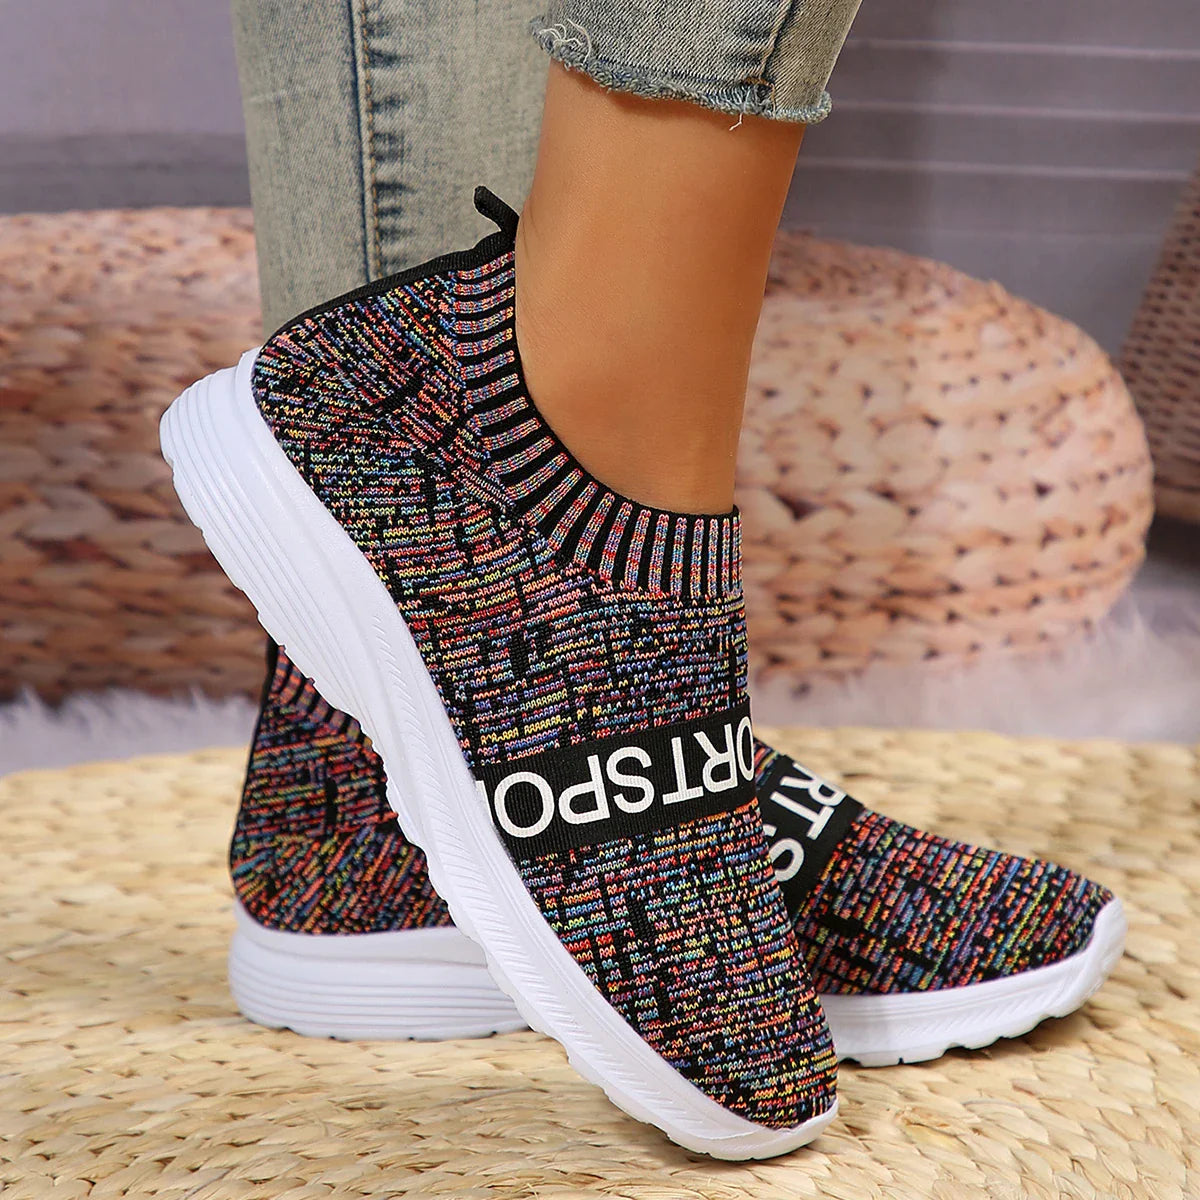 Gominglo - Striped Knitted Platform Sneakers Lightweight Shoes